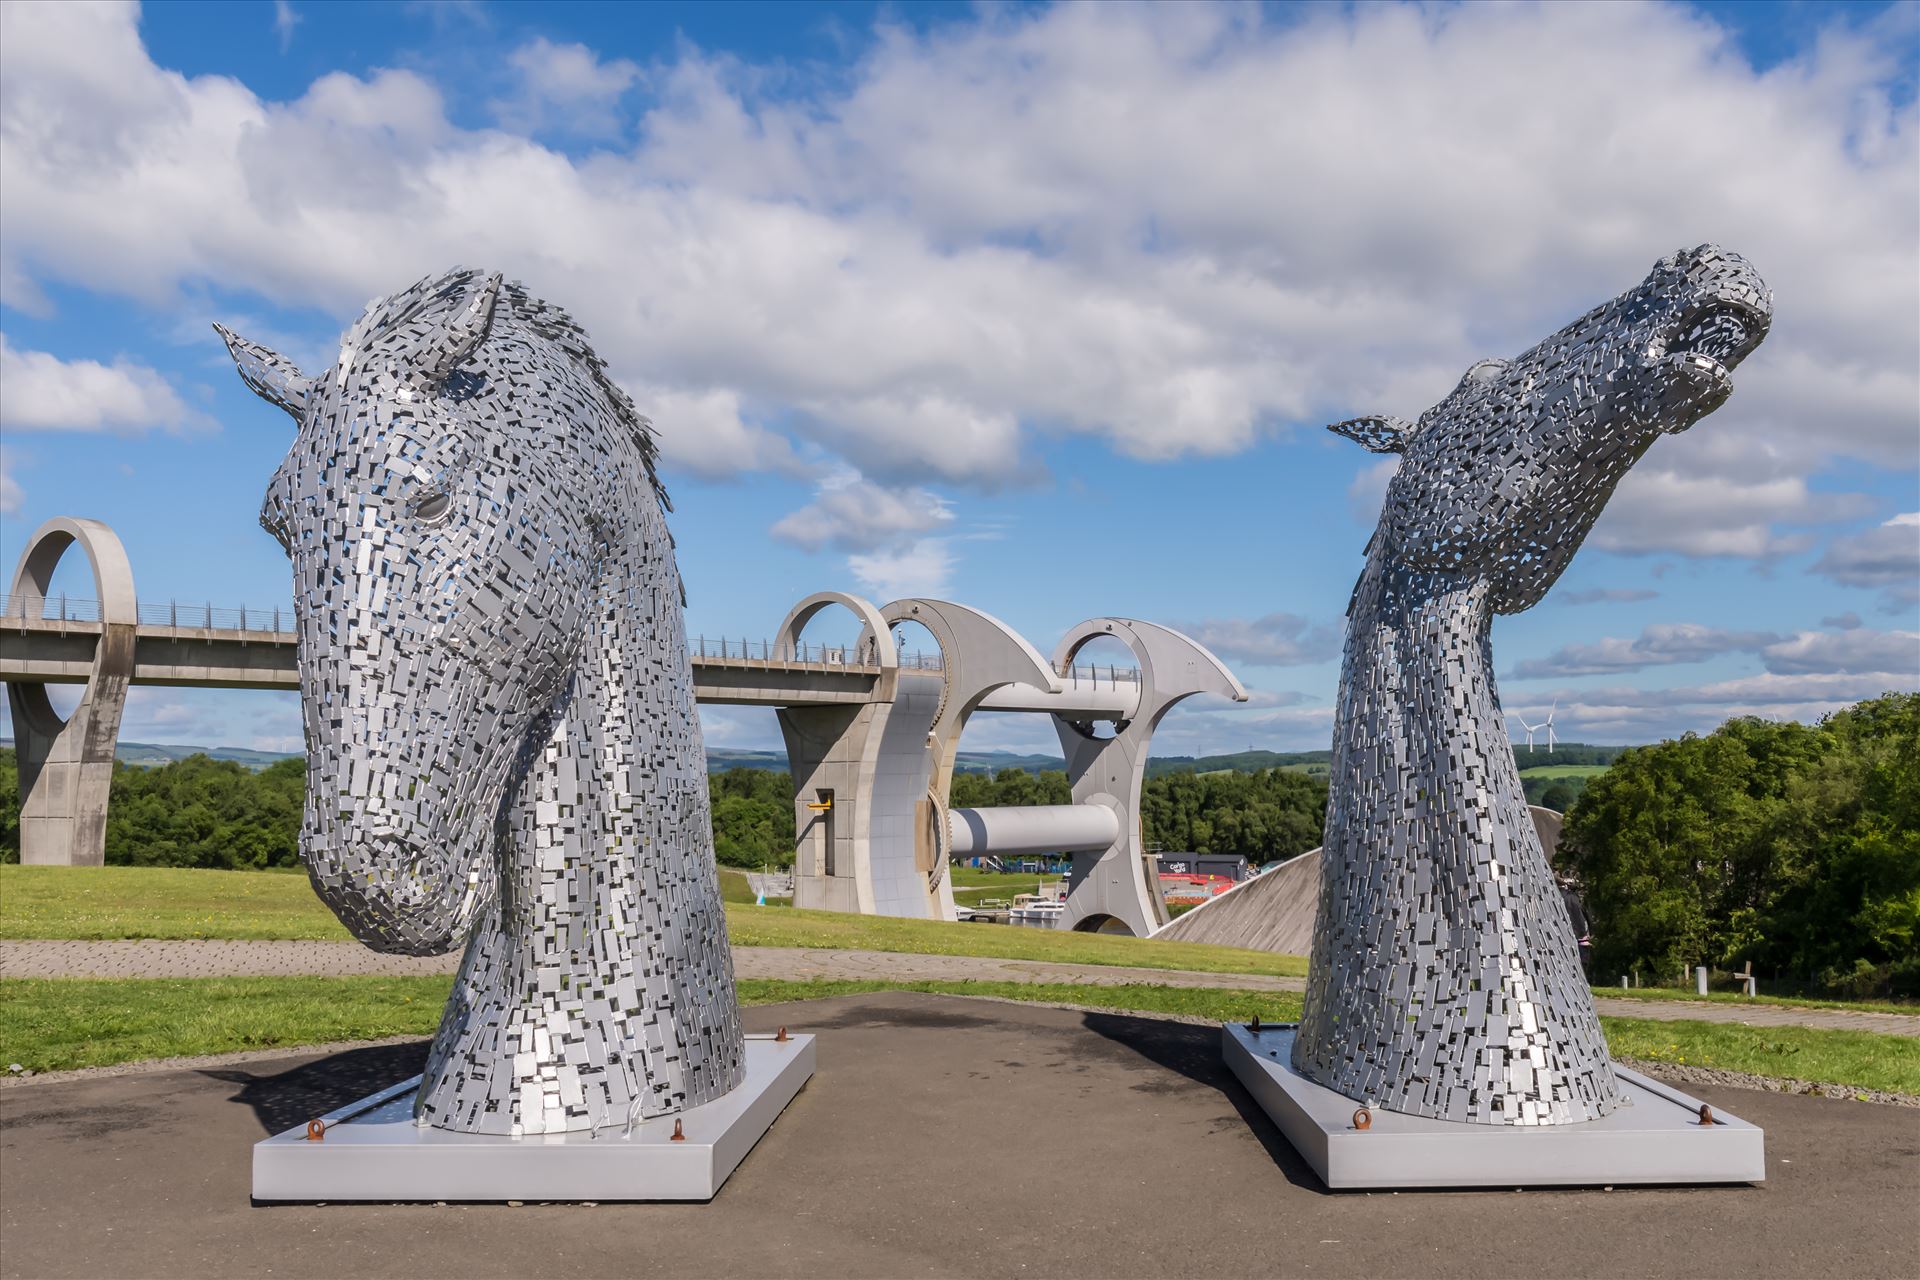 The Falkirk Wheel & miniature Kelpies - The Falkirk Wheel is a rotating boat lift in Scotland, connecting the Forth and Clyde Canal with the Union Canal. It opened in 2002, reconnecting the two canals for the first time since the 1930s as part of the Millennium Link project. by philreay